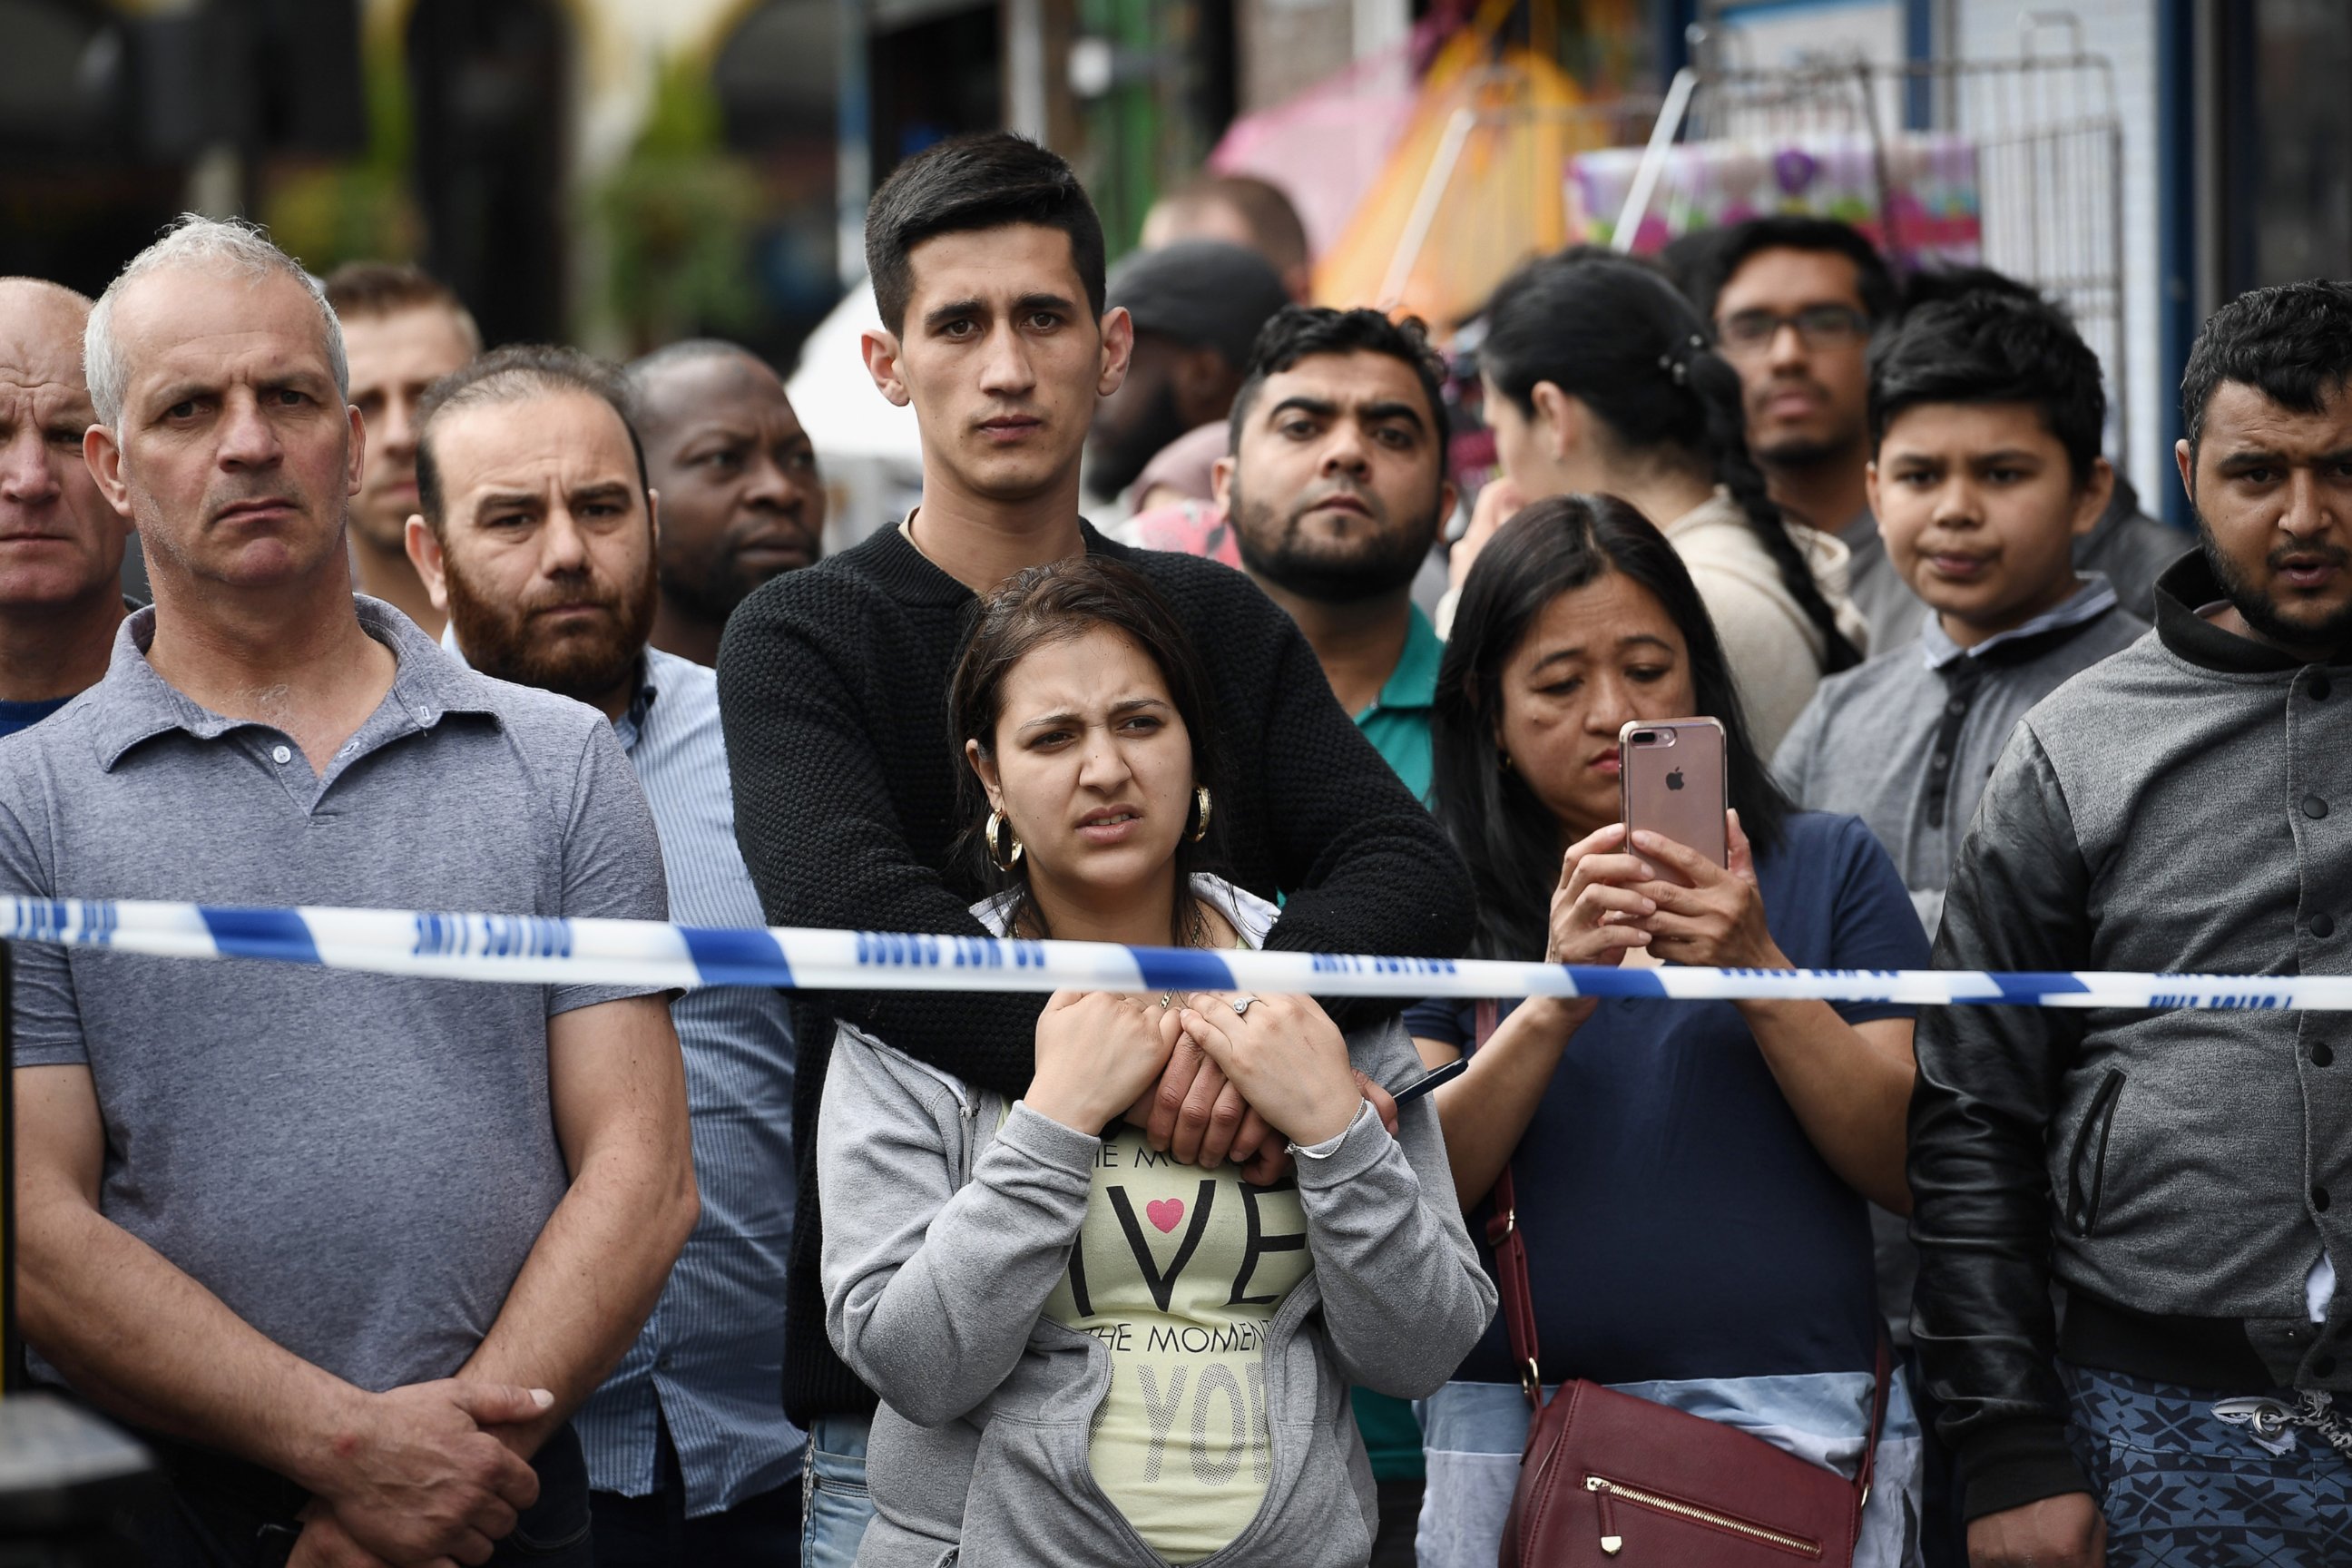 PHOTO: Members of the public view the scene after police officers raided a property in East Ham, June 4, 2017 in London, England.